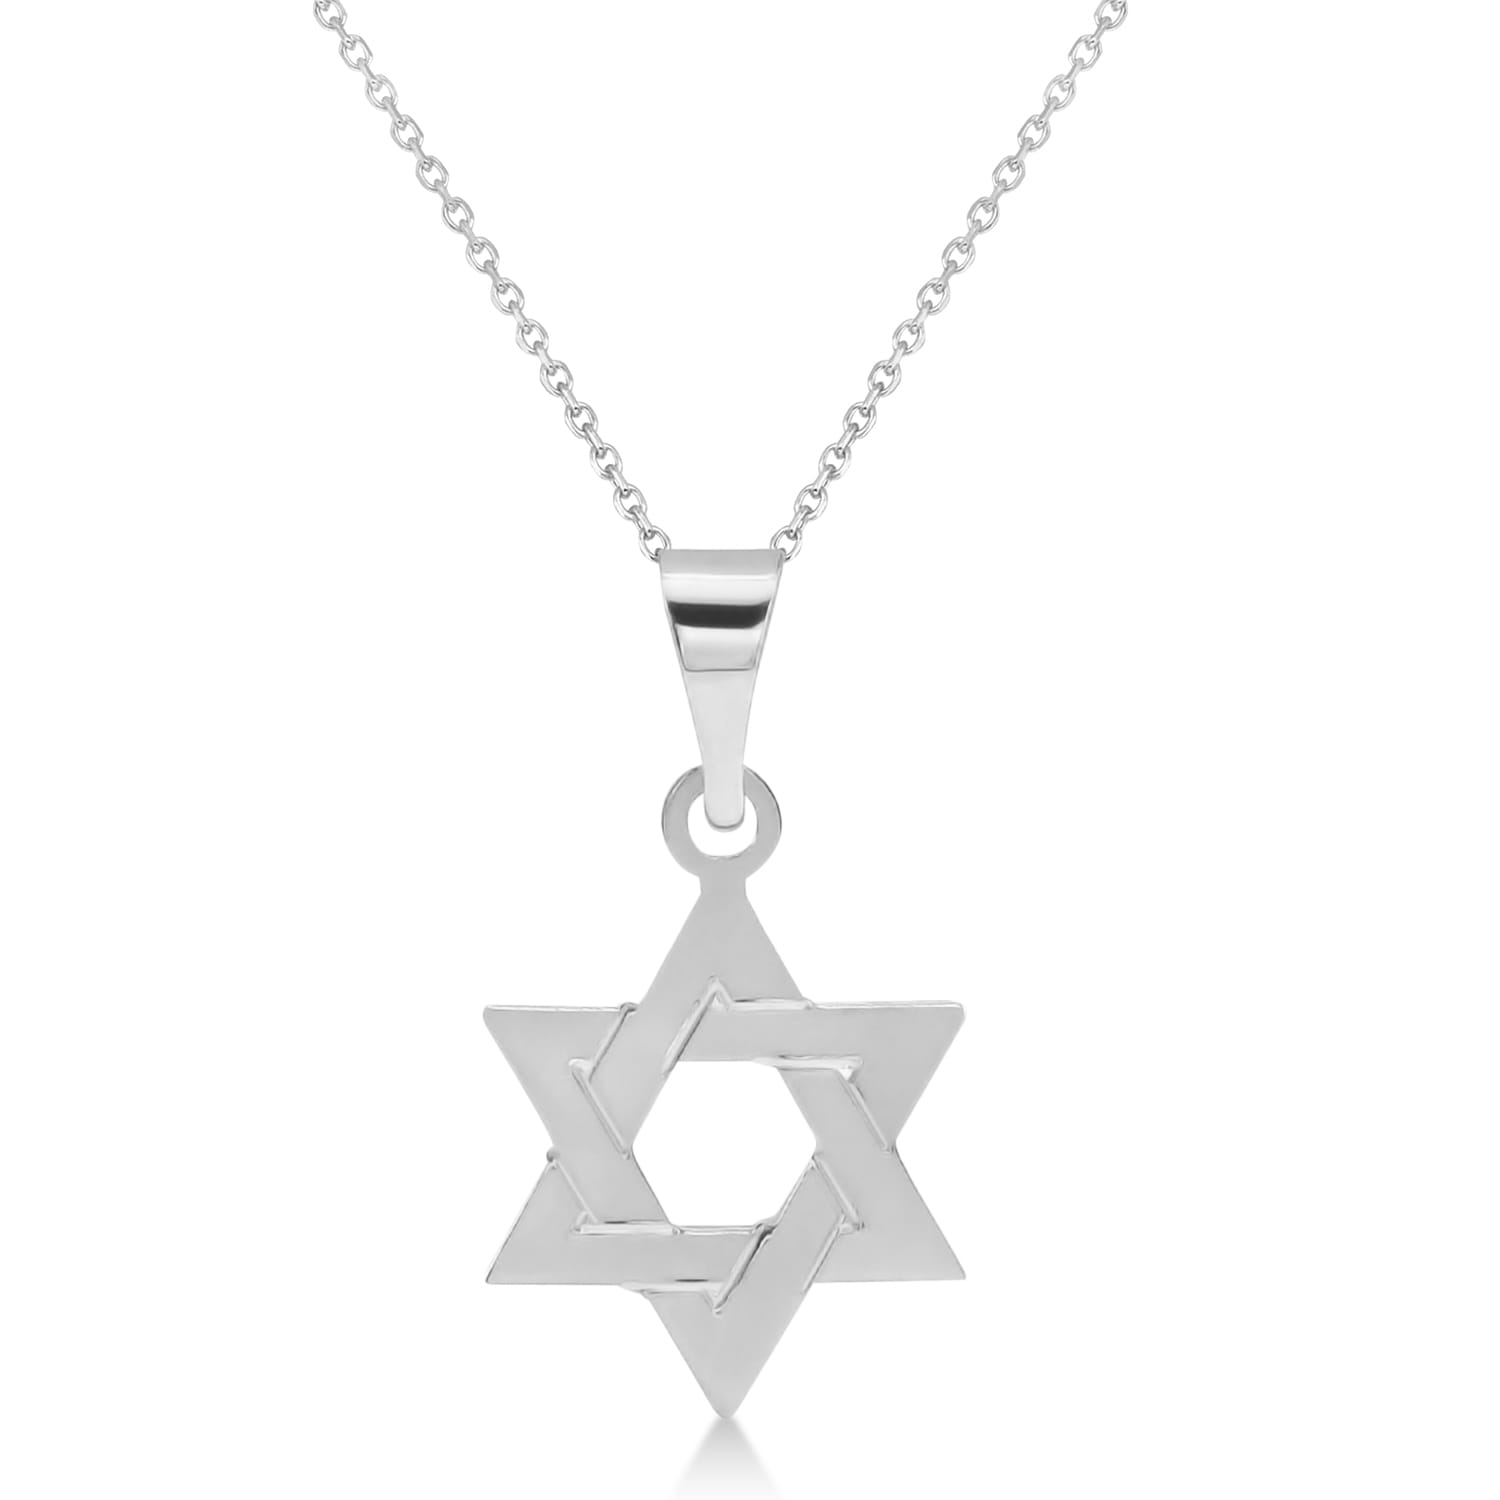 Jewish Star of David Pendant Pendant Necklace Sterling Silver